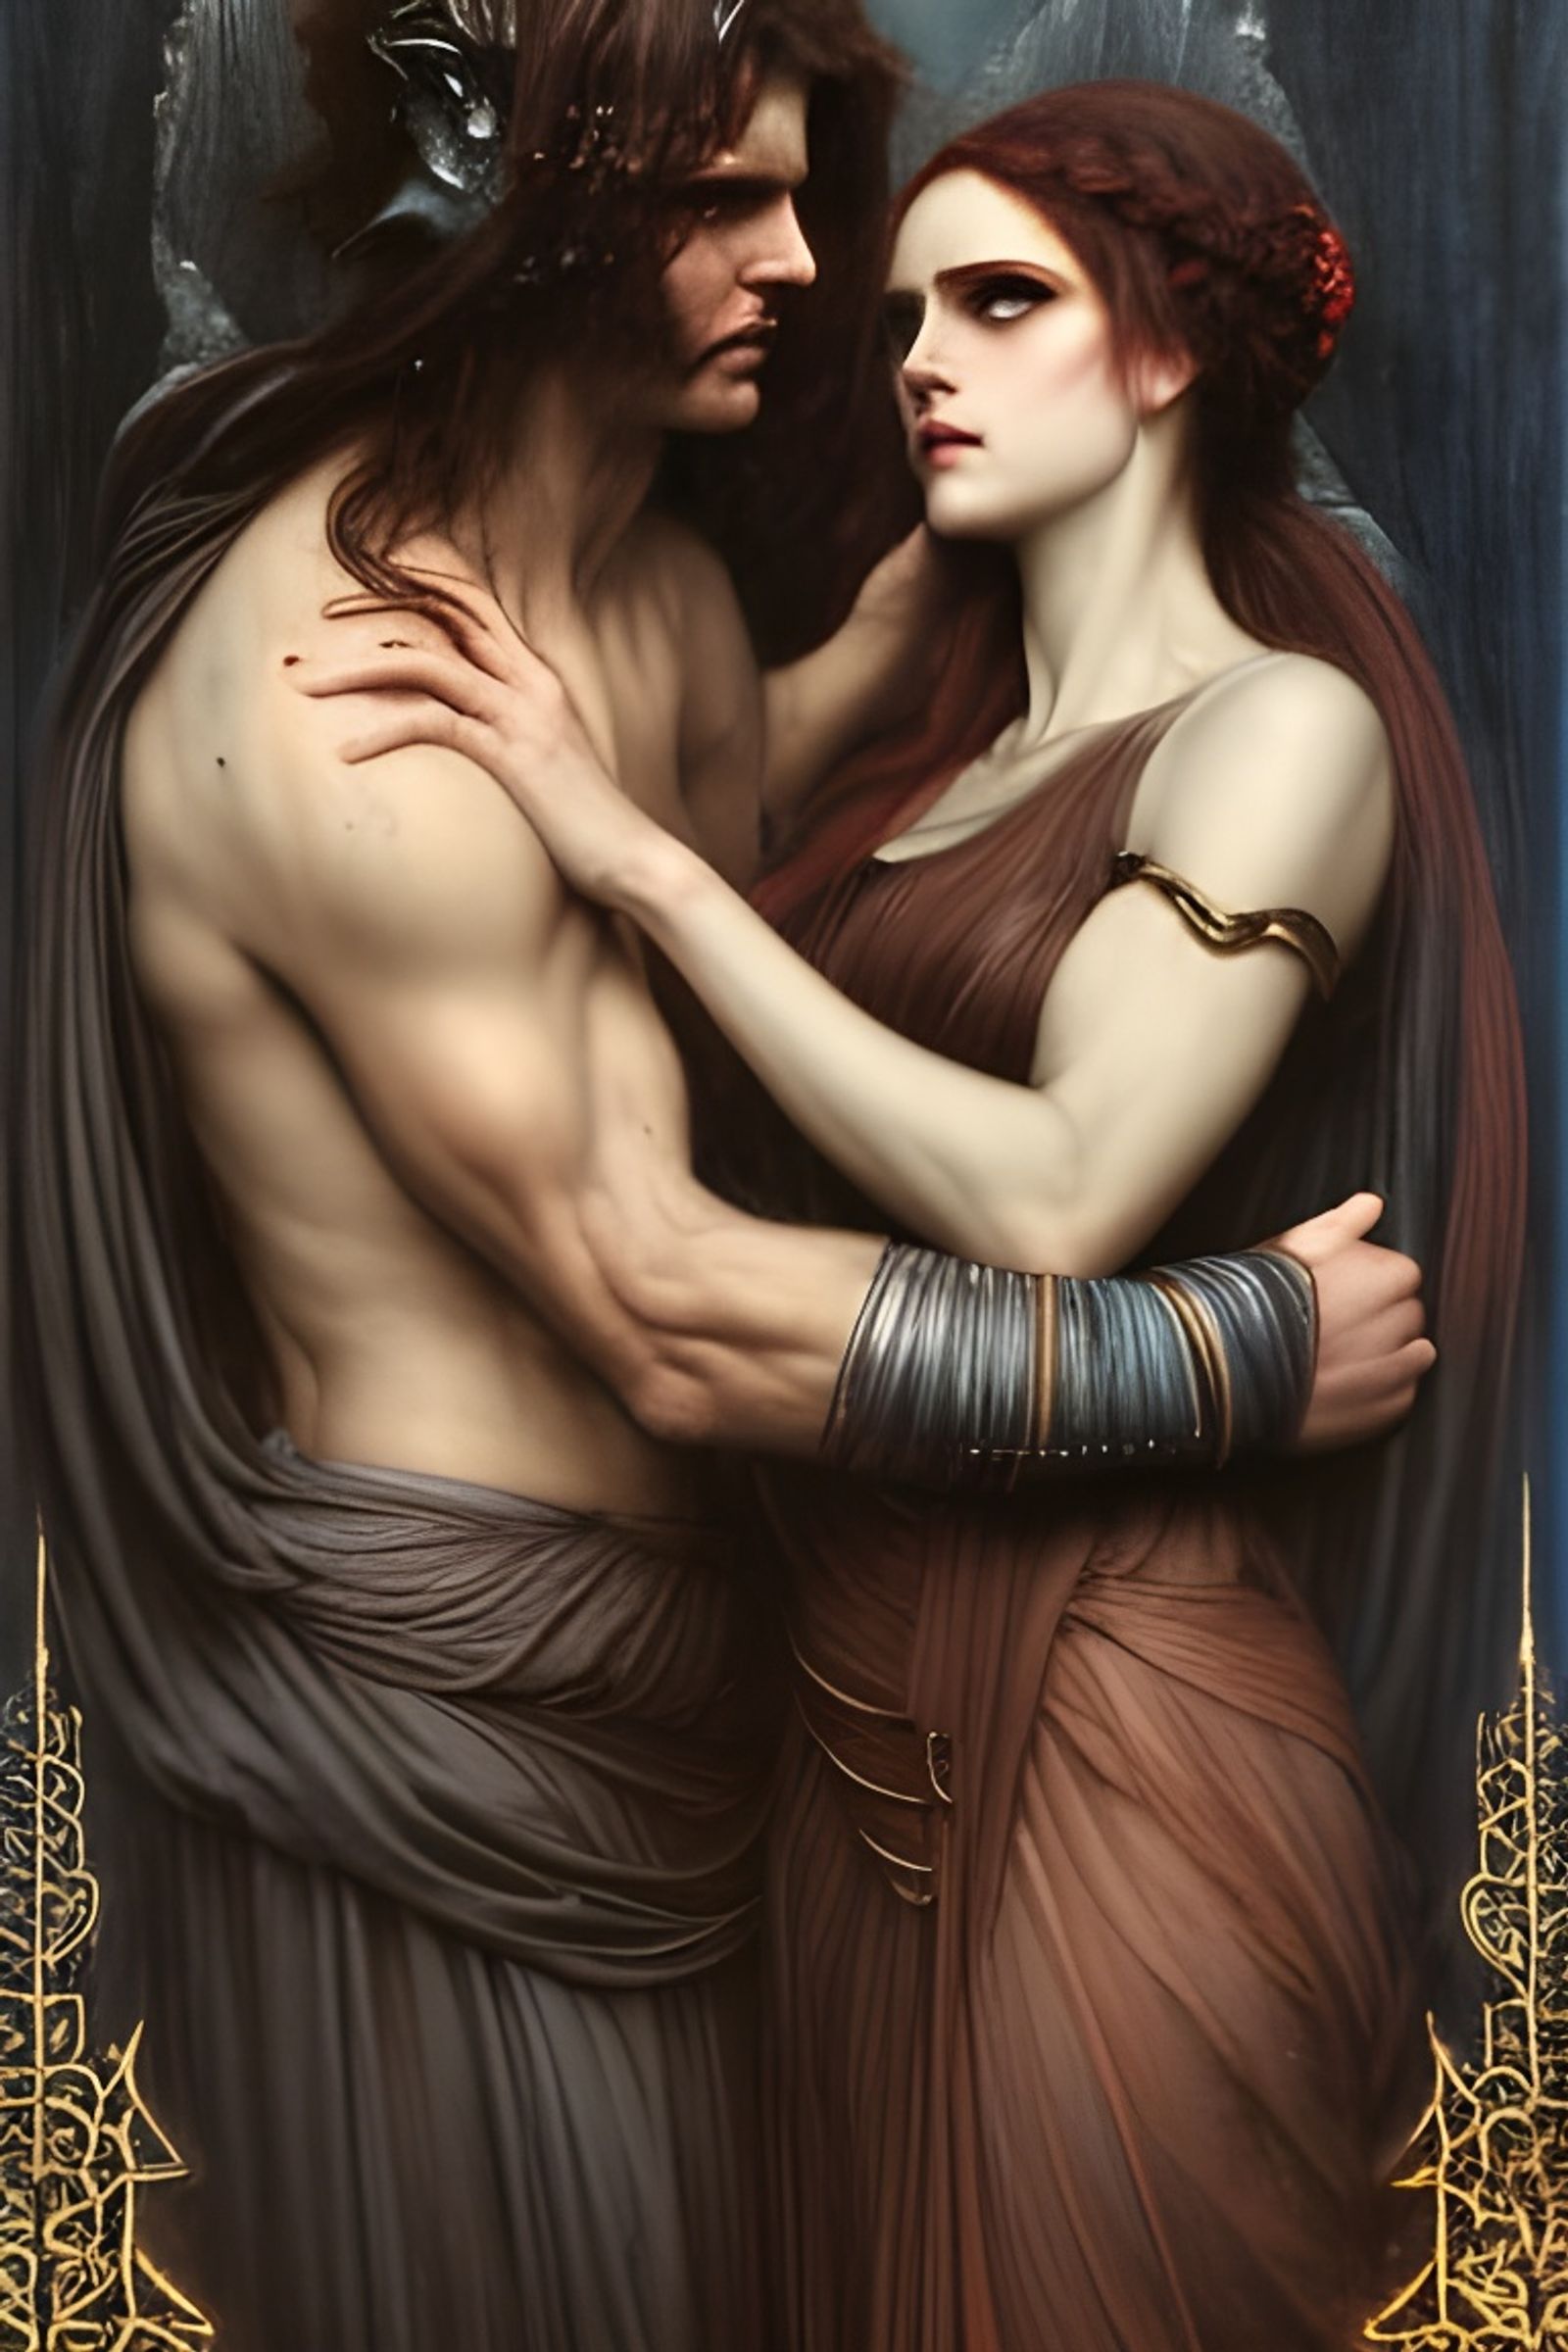 hades and persephone